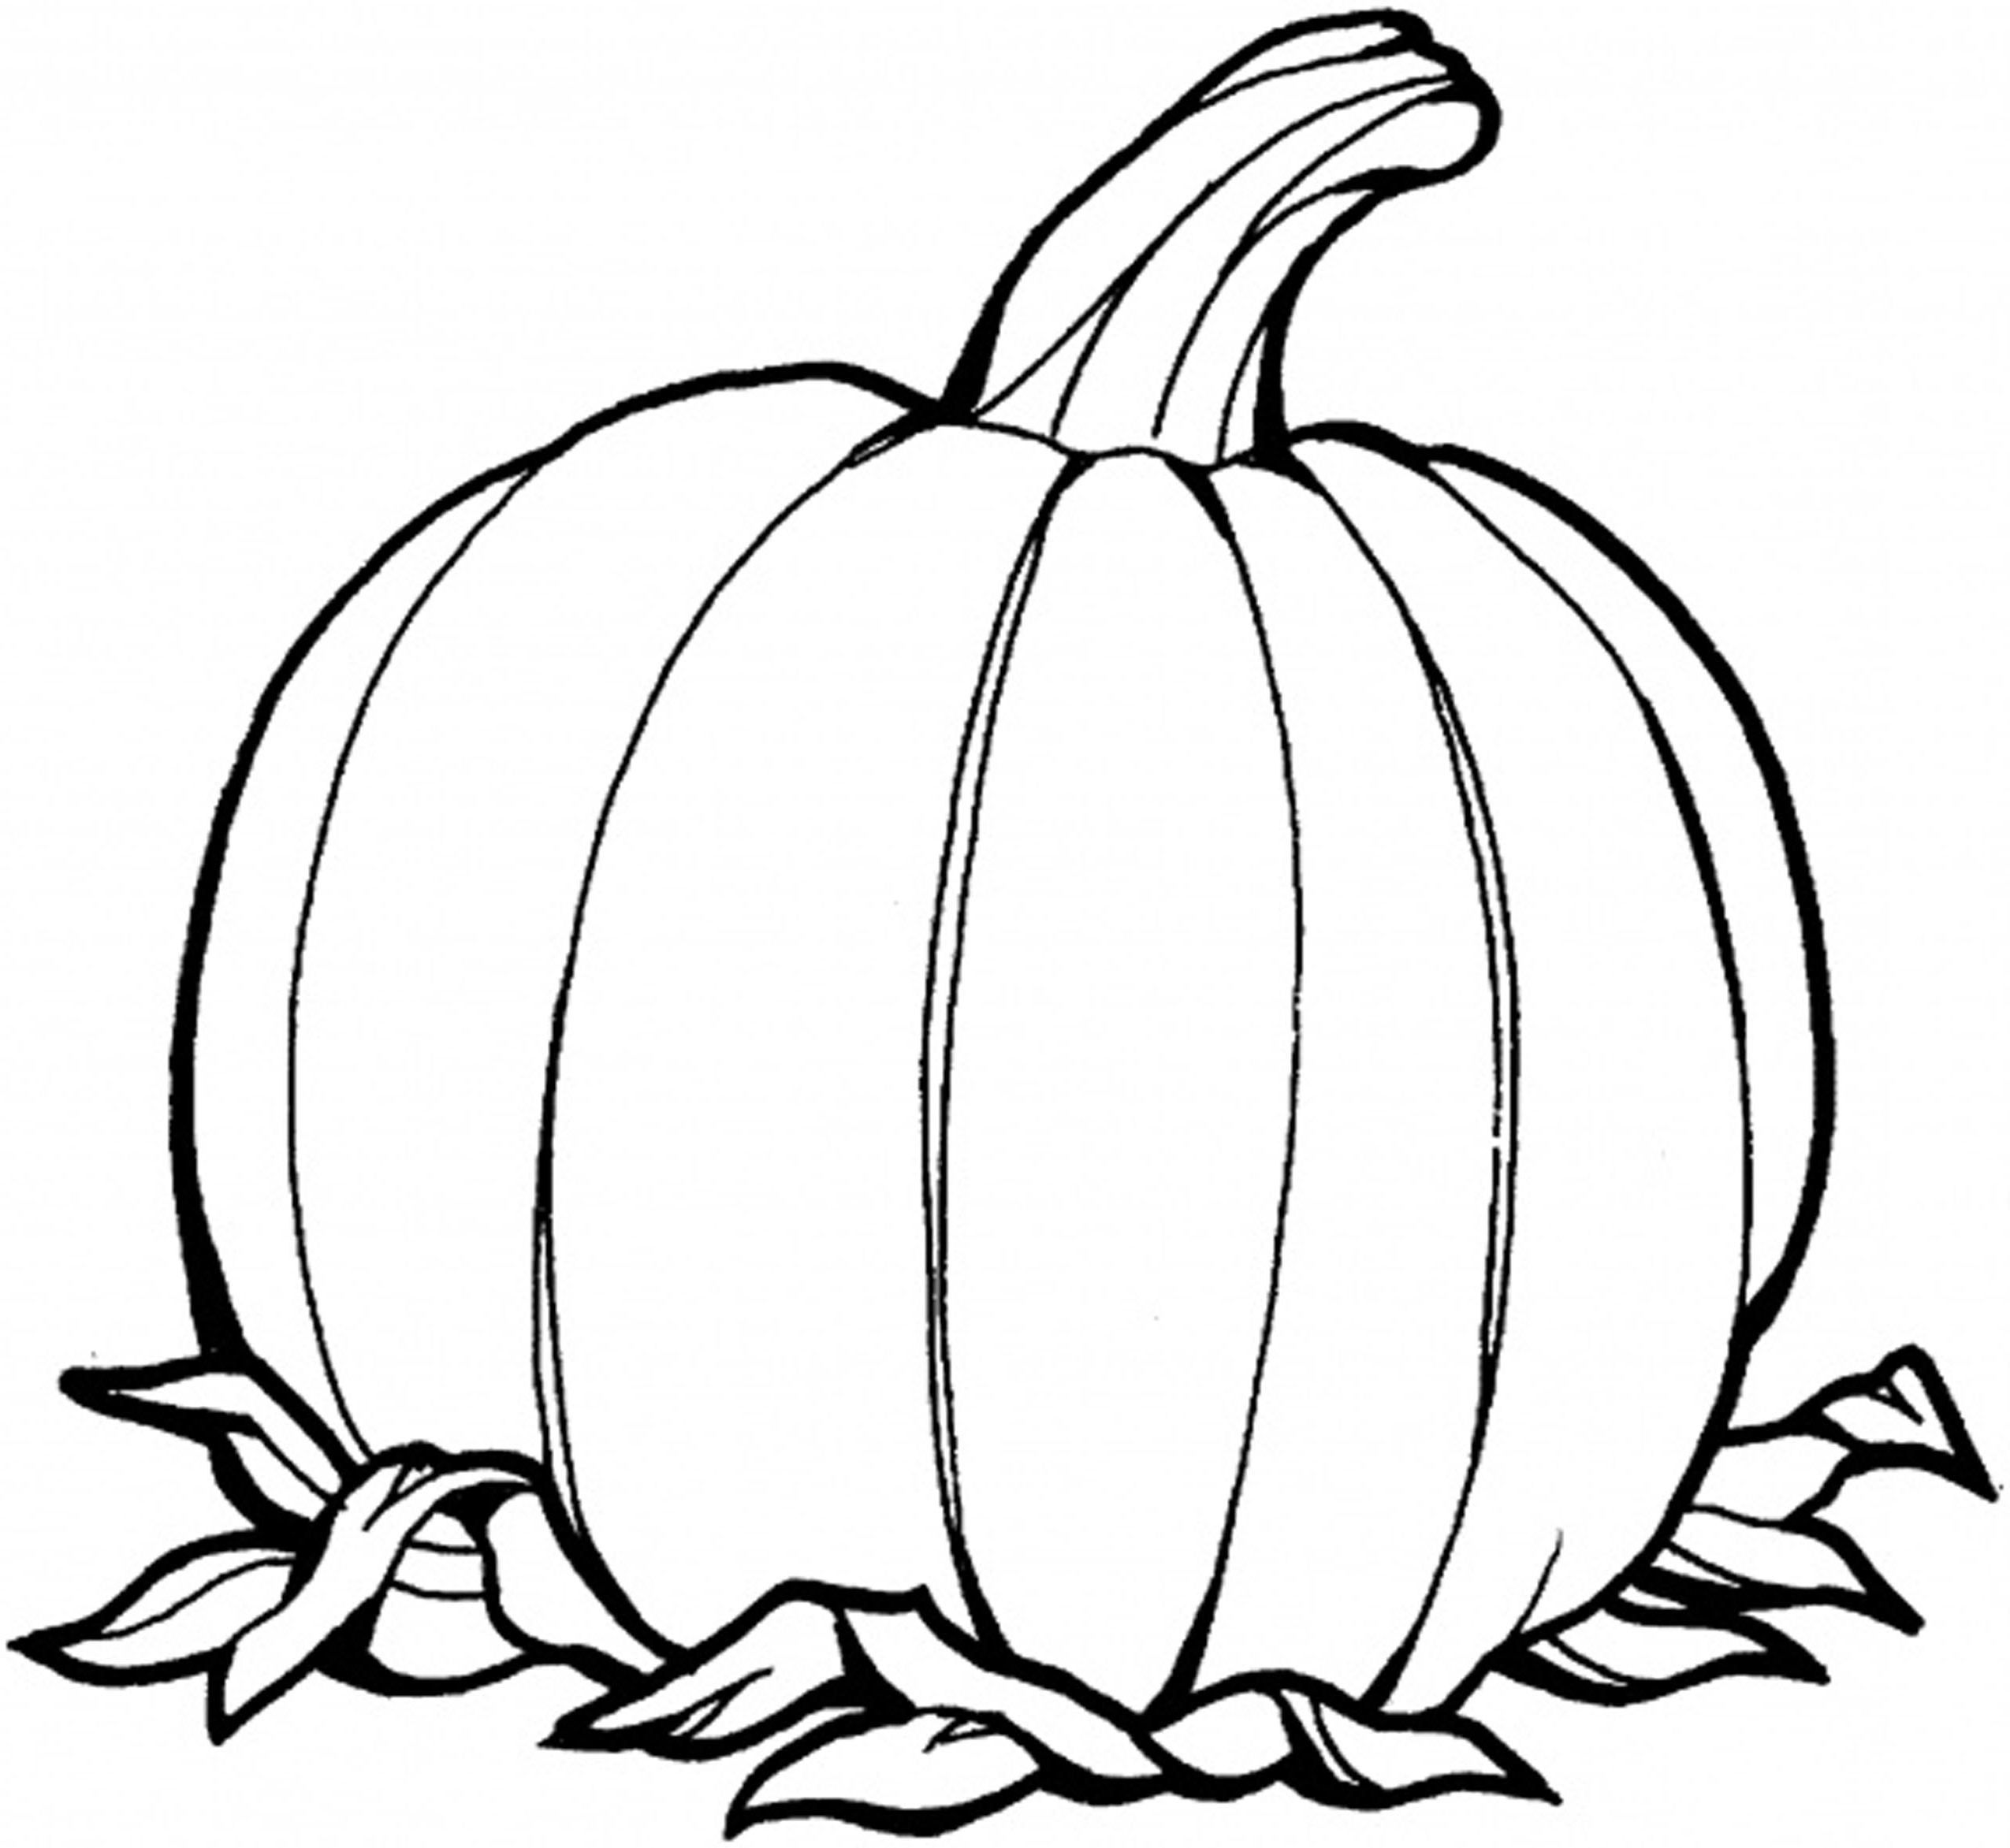 COLORING PAGE PUMPKINS - Coloring Home